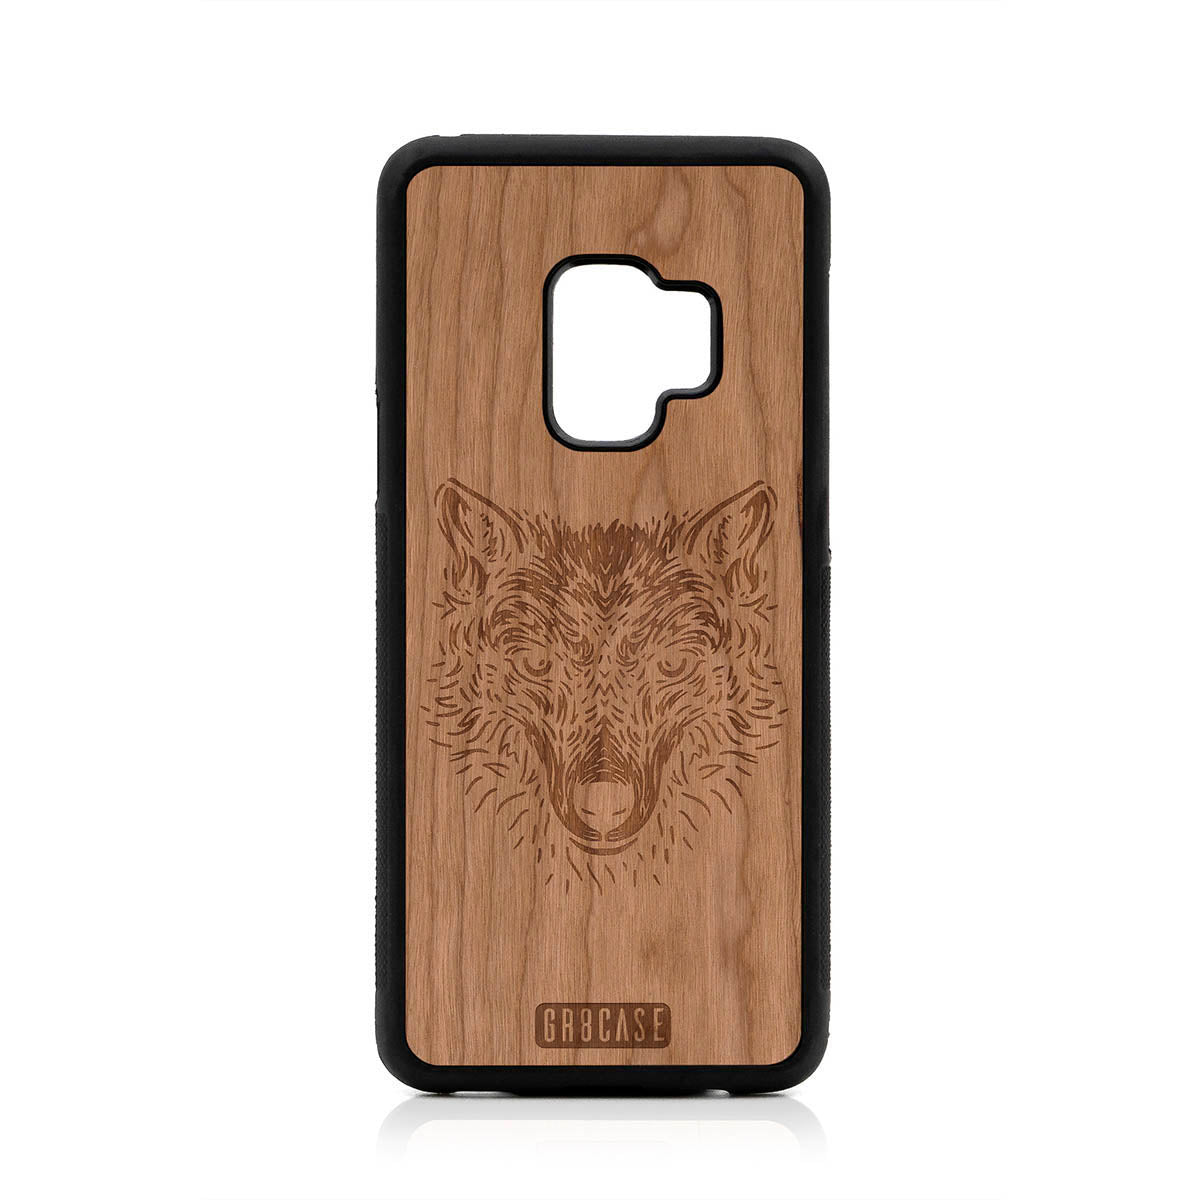 Furry Wolf Design Wood Case For Samsung Galaxy S9